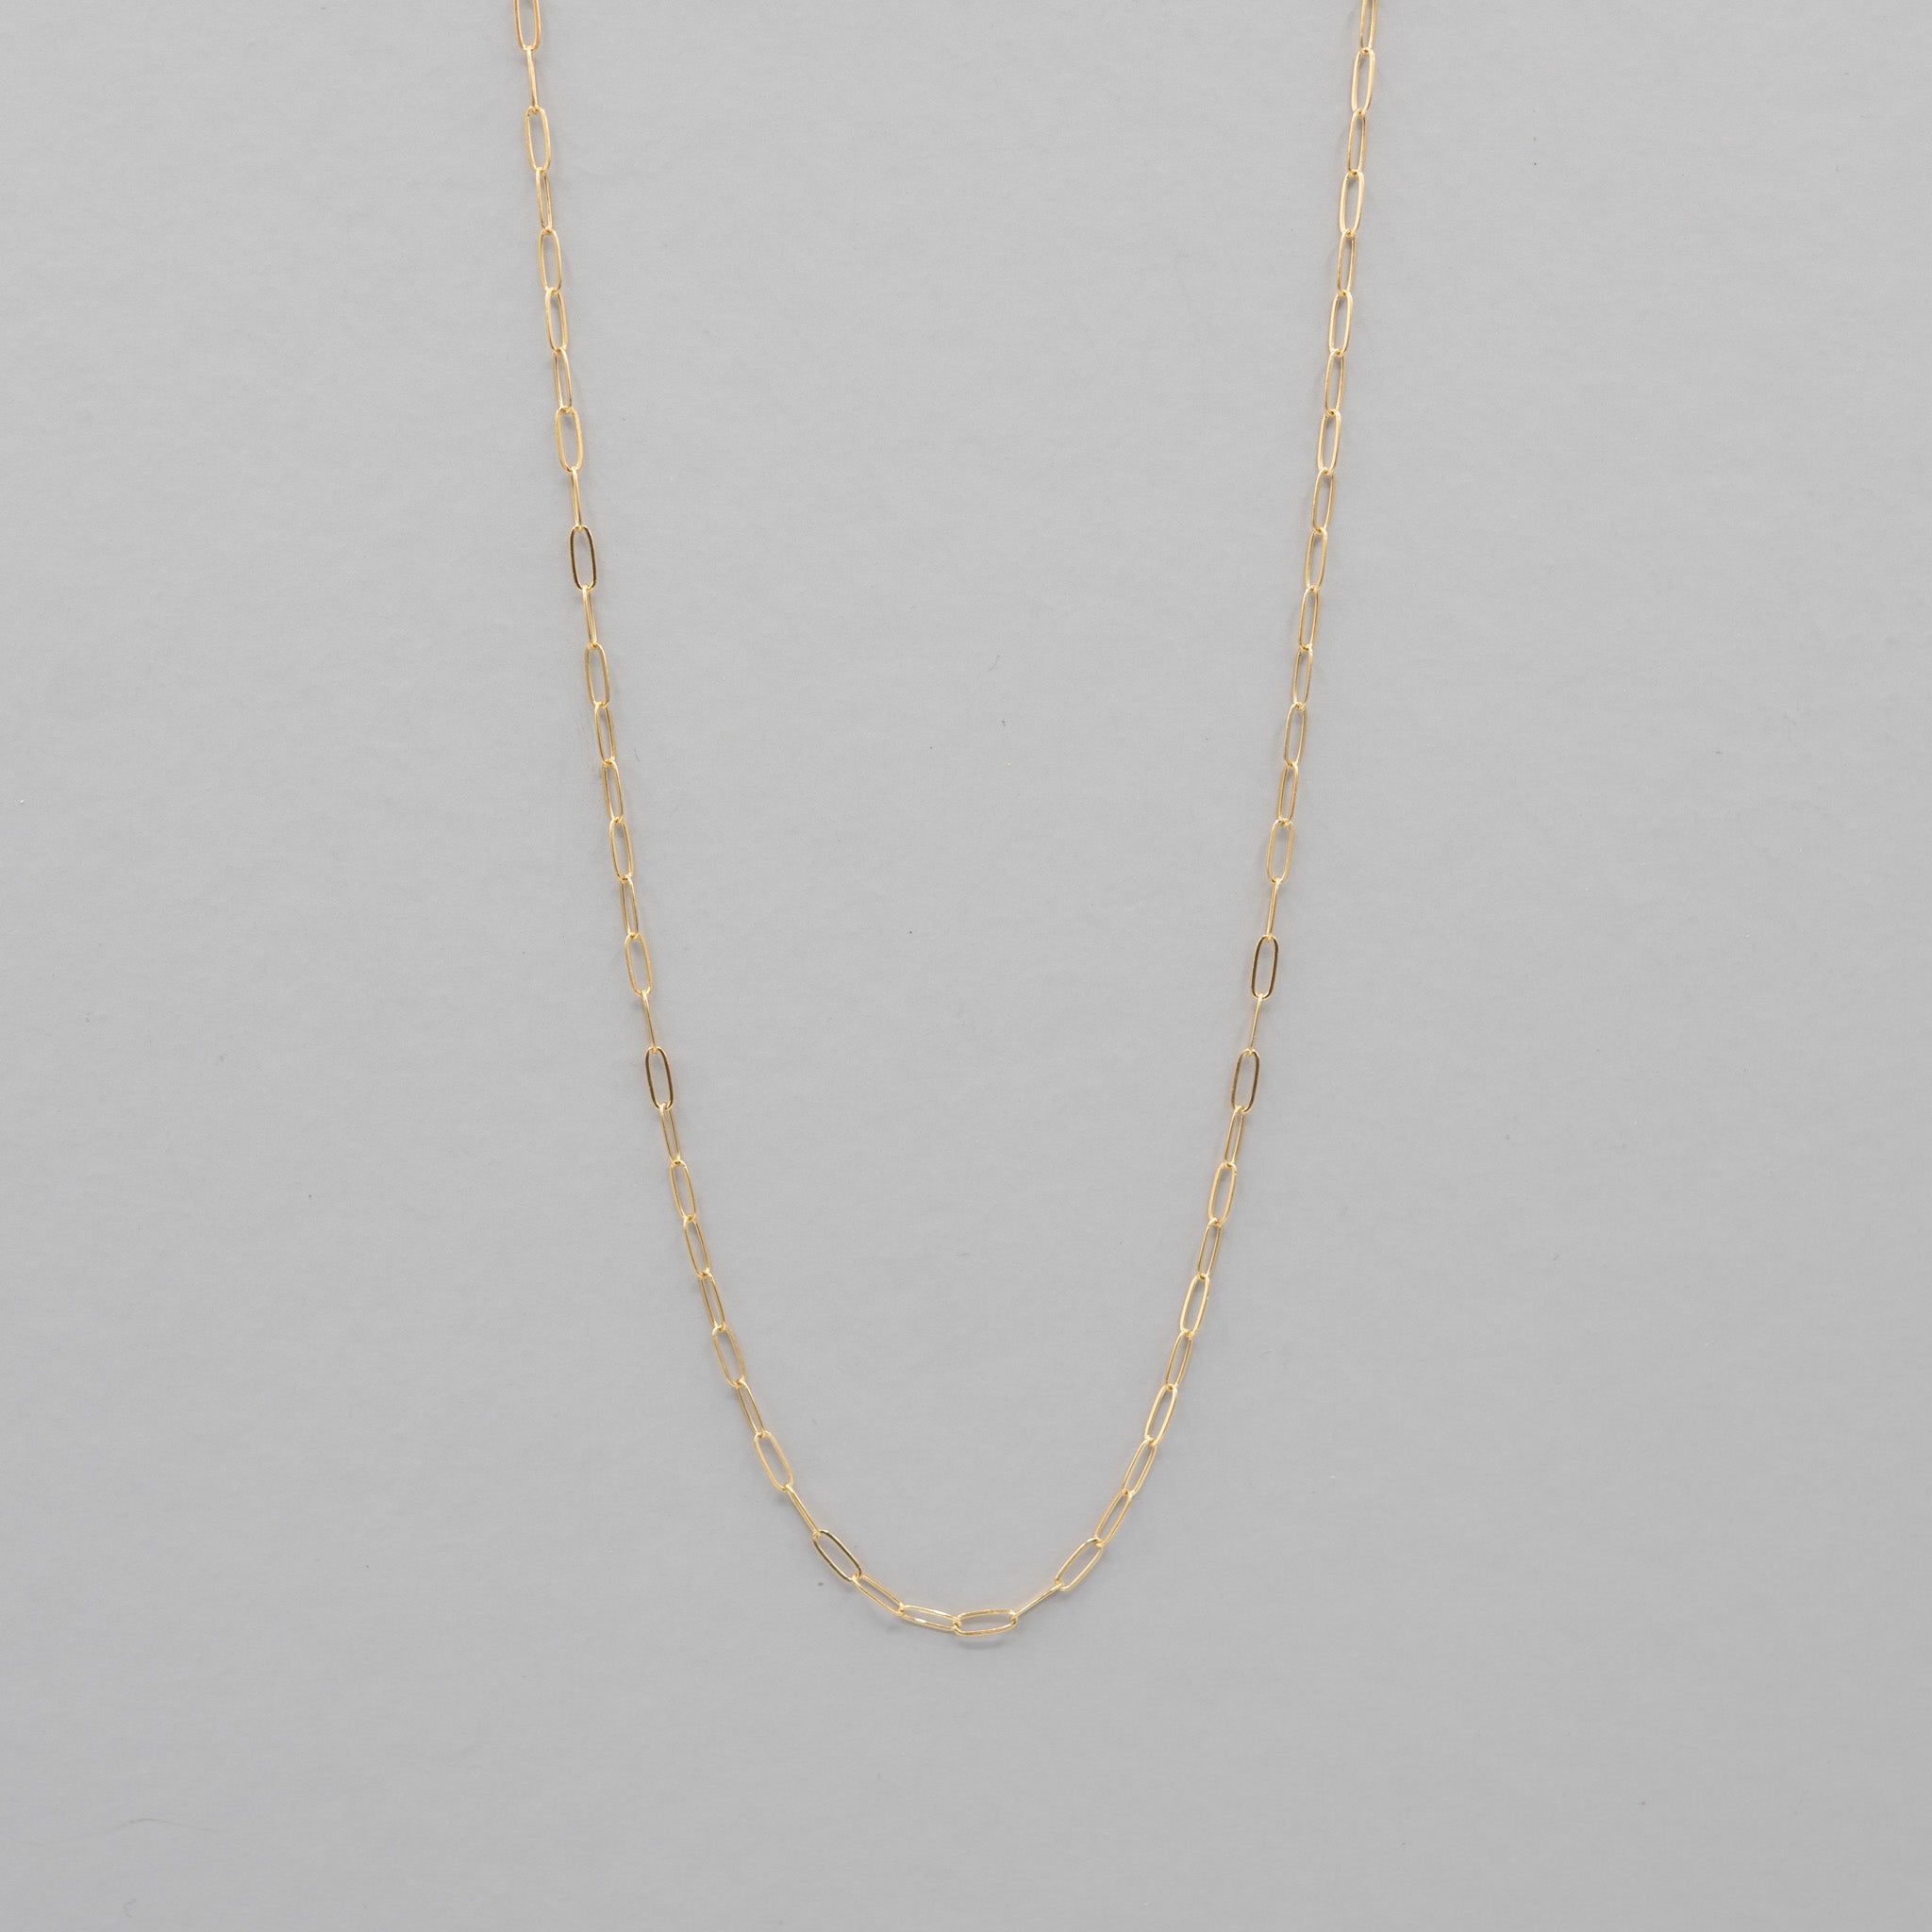 14k Gold Filled Petite Paper Clip Layering Chain